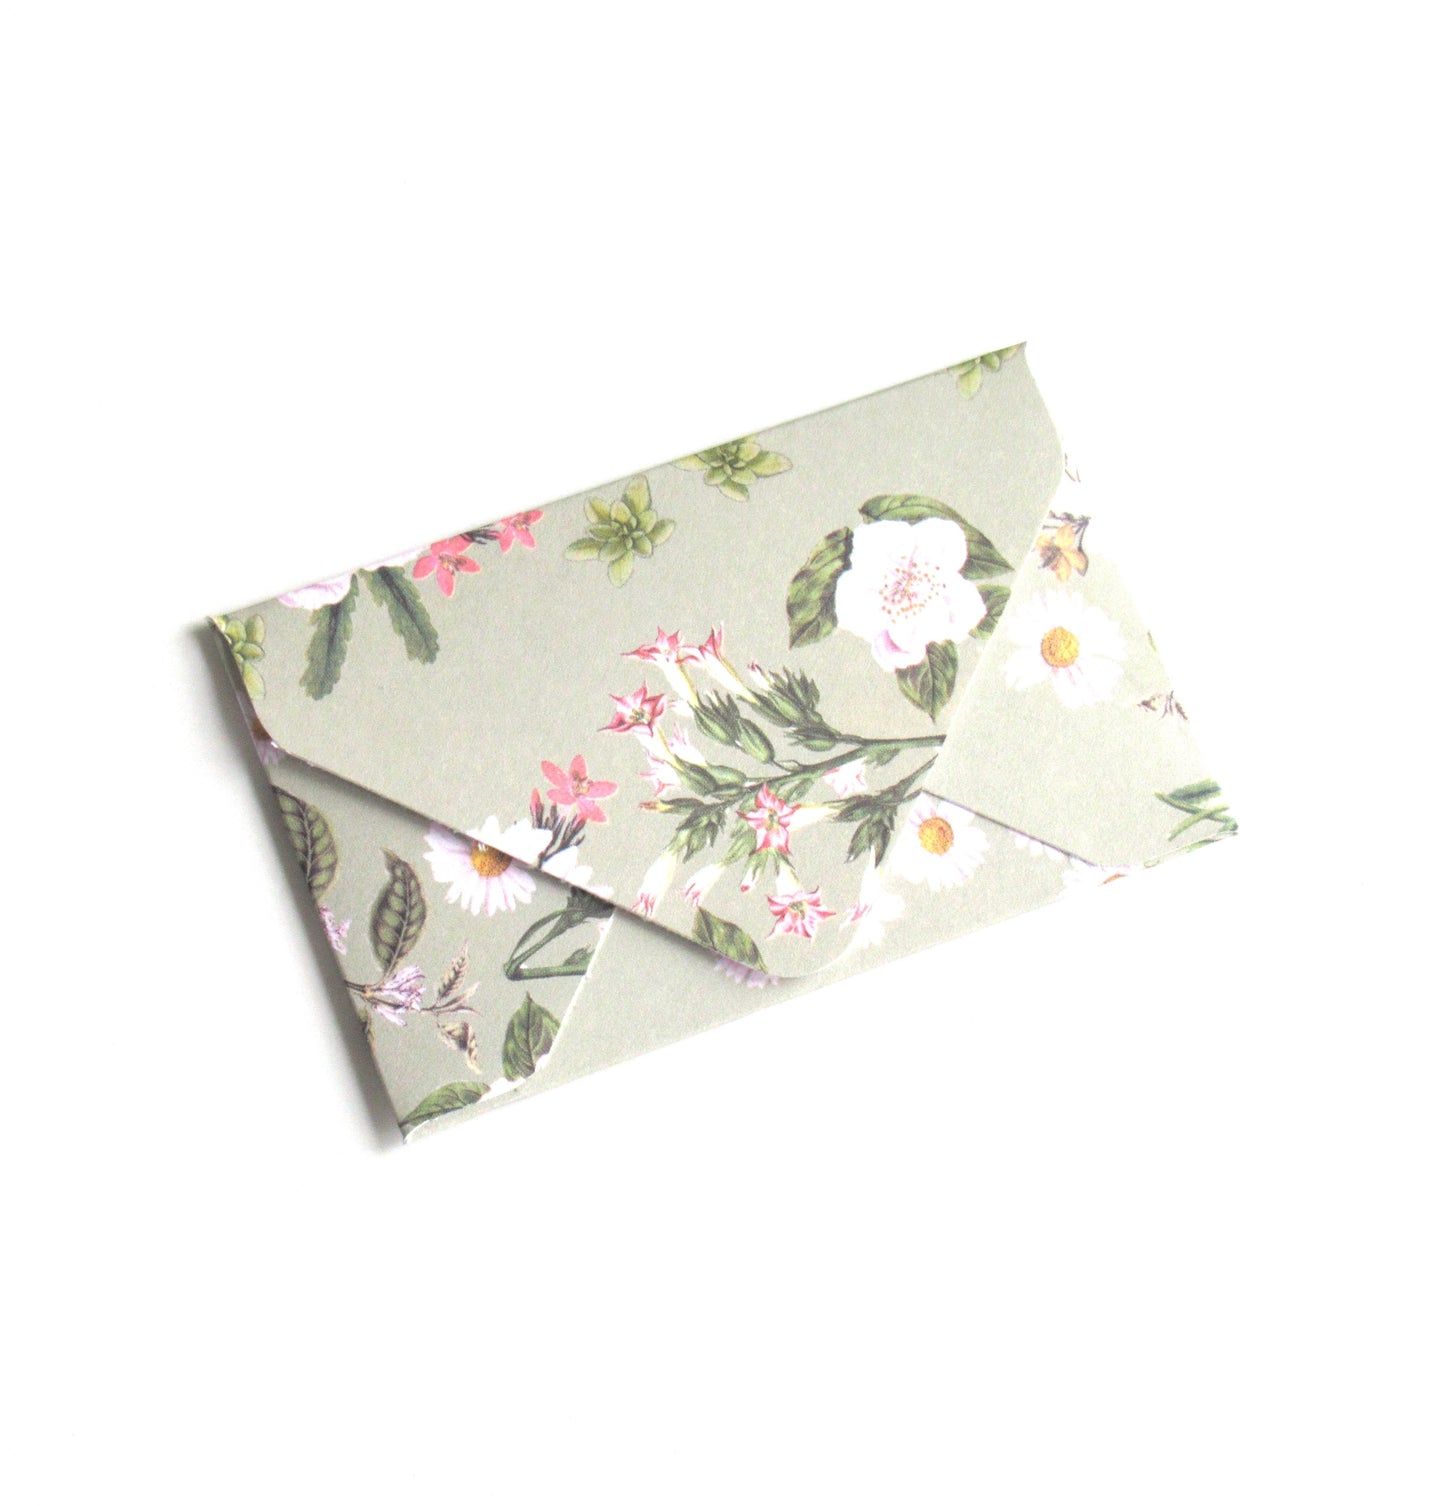 Gift Card Envelopes - Mini Envelopes for Junk Journal, Business Cards, Tooth Fairy, Lunch Notes (Stationery & More) (Literacy Project) 102